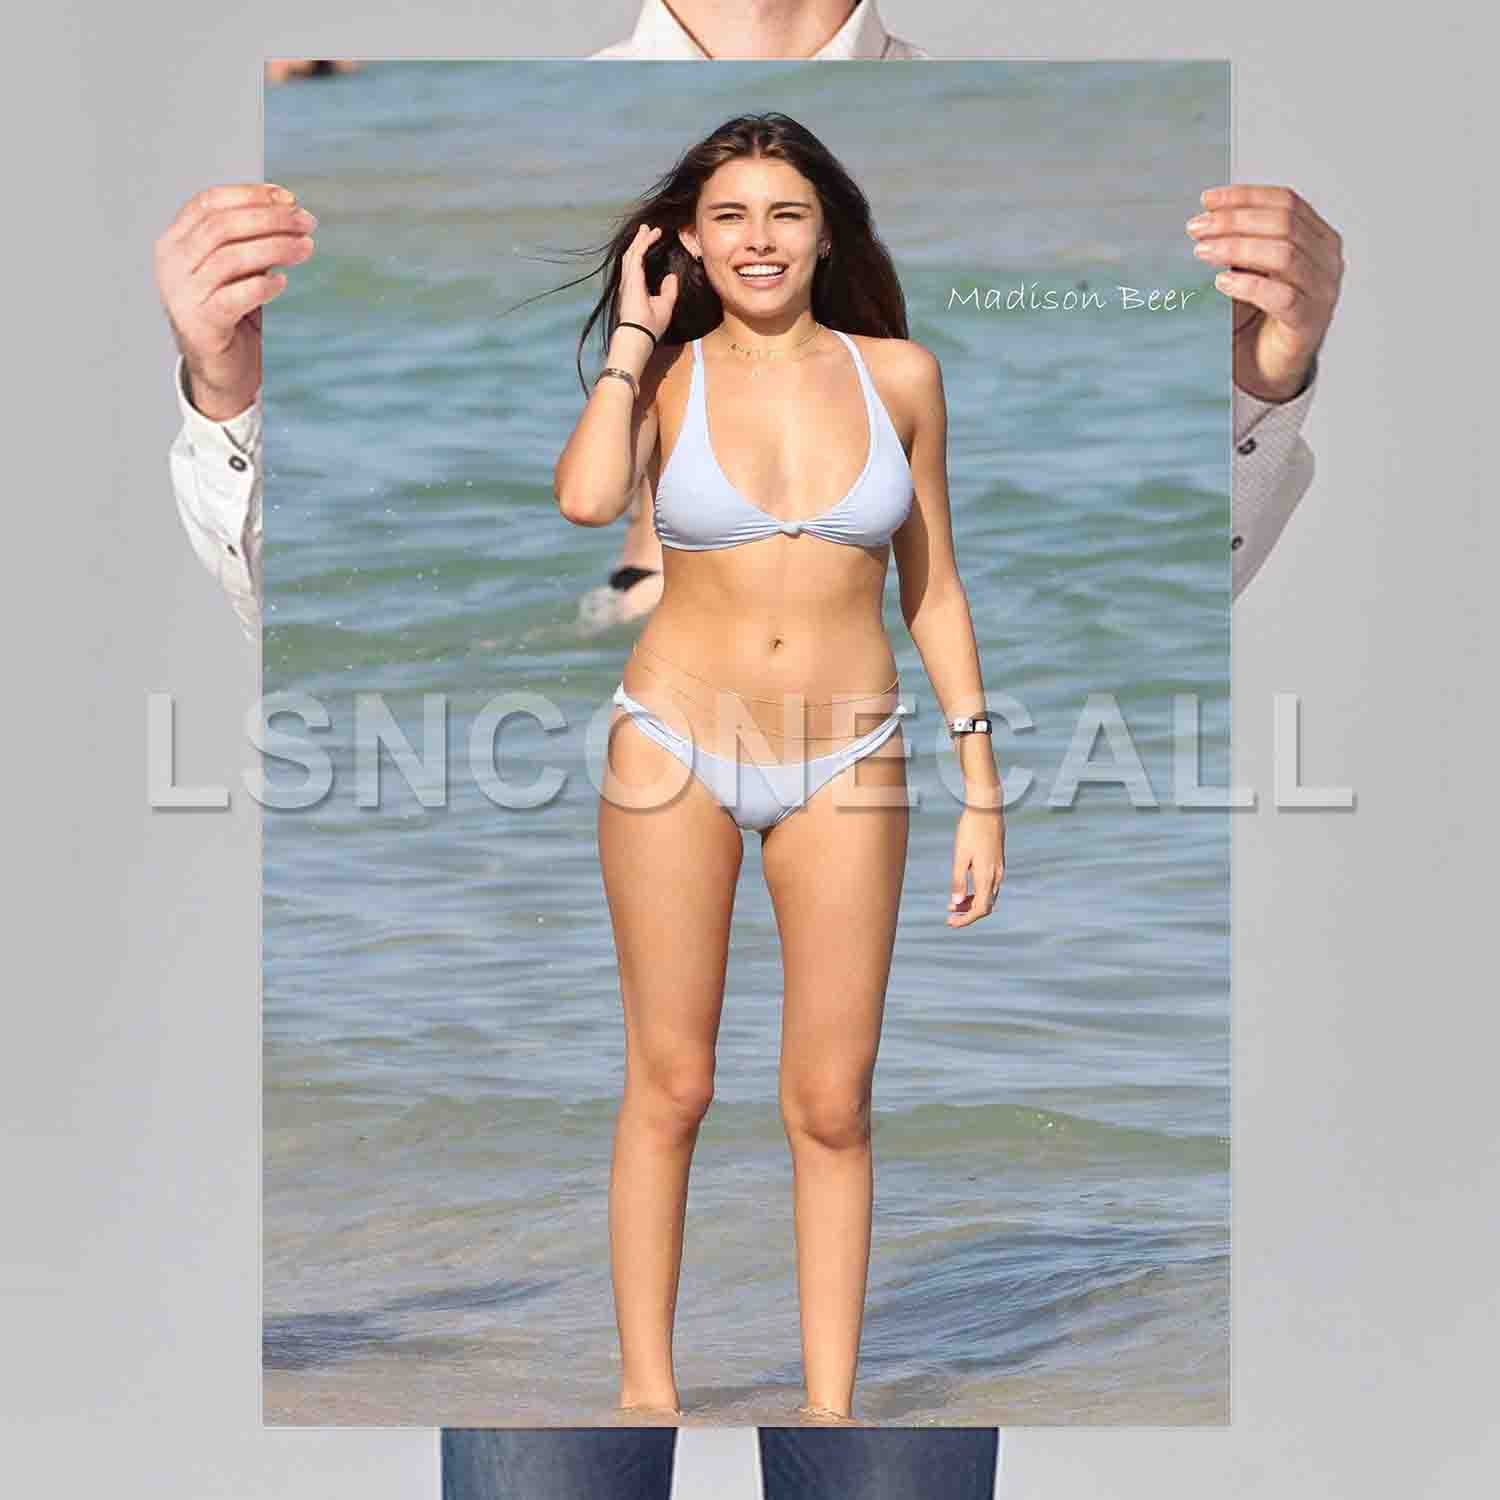 Madison Beer Poster Print Art Wall Decor Lsnconecall